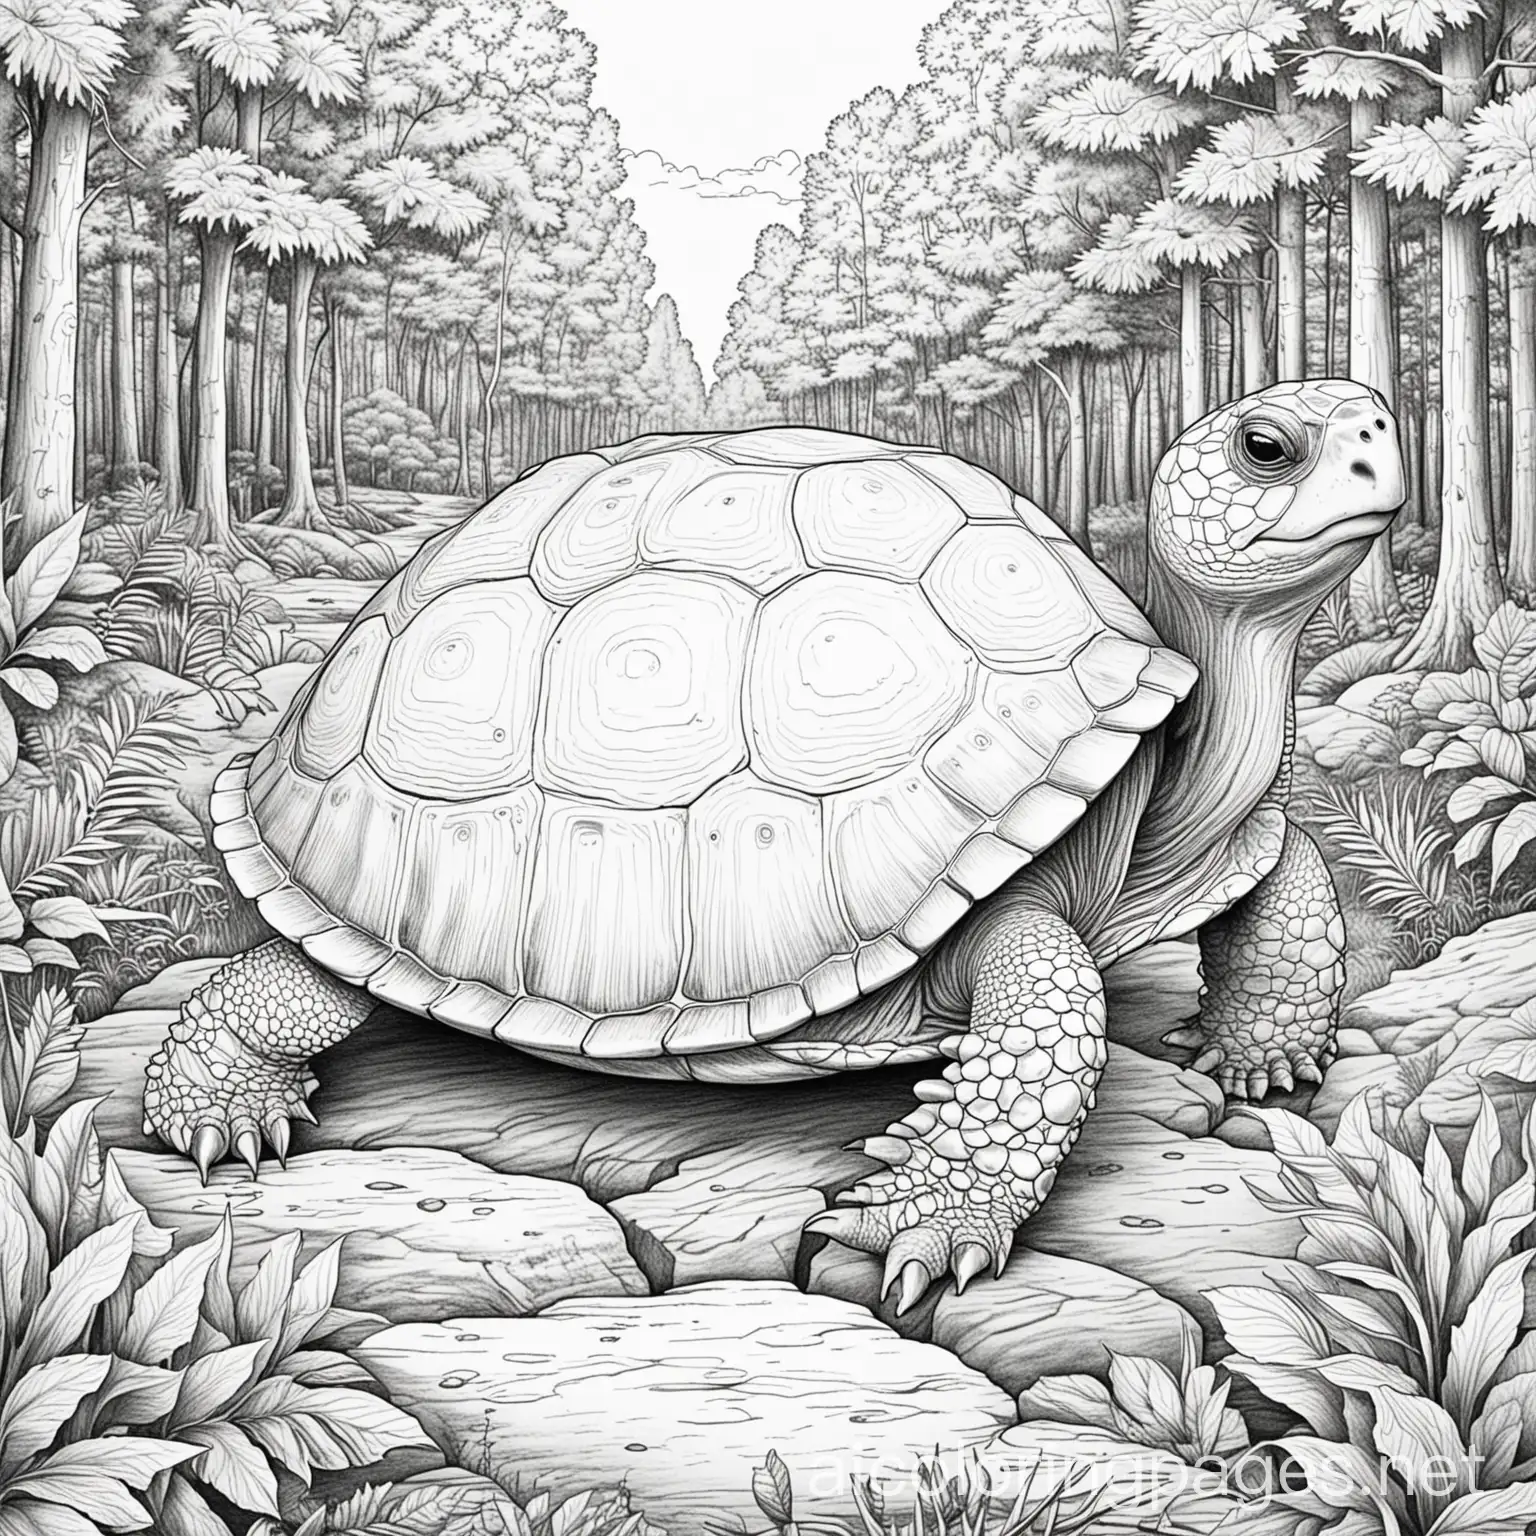 turttule walkin

  in forest for coloring page, Coloring Page, black and white, line art, white background, Simplicity, Ample White Space. The background of the coloring page is plain white to make it easy for young children to color within the lines. The outlines of all the subjects are easy to distinguish, making it simple for kids to color without too much difficulty